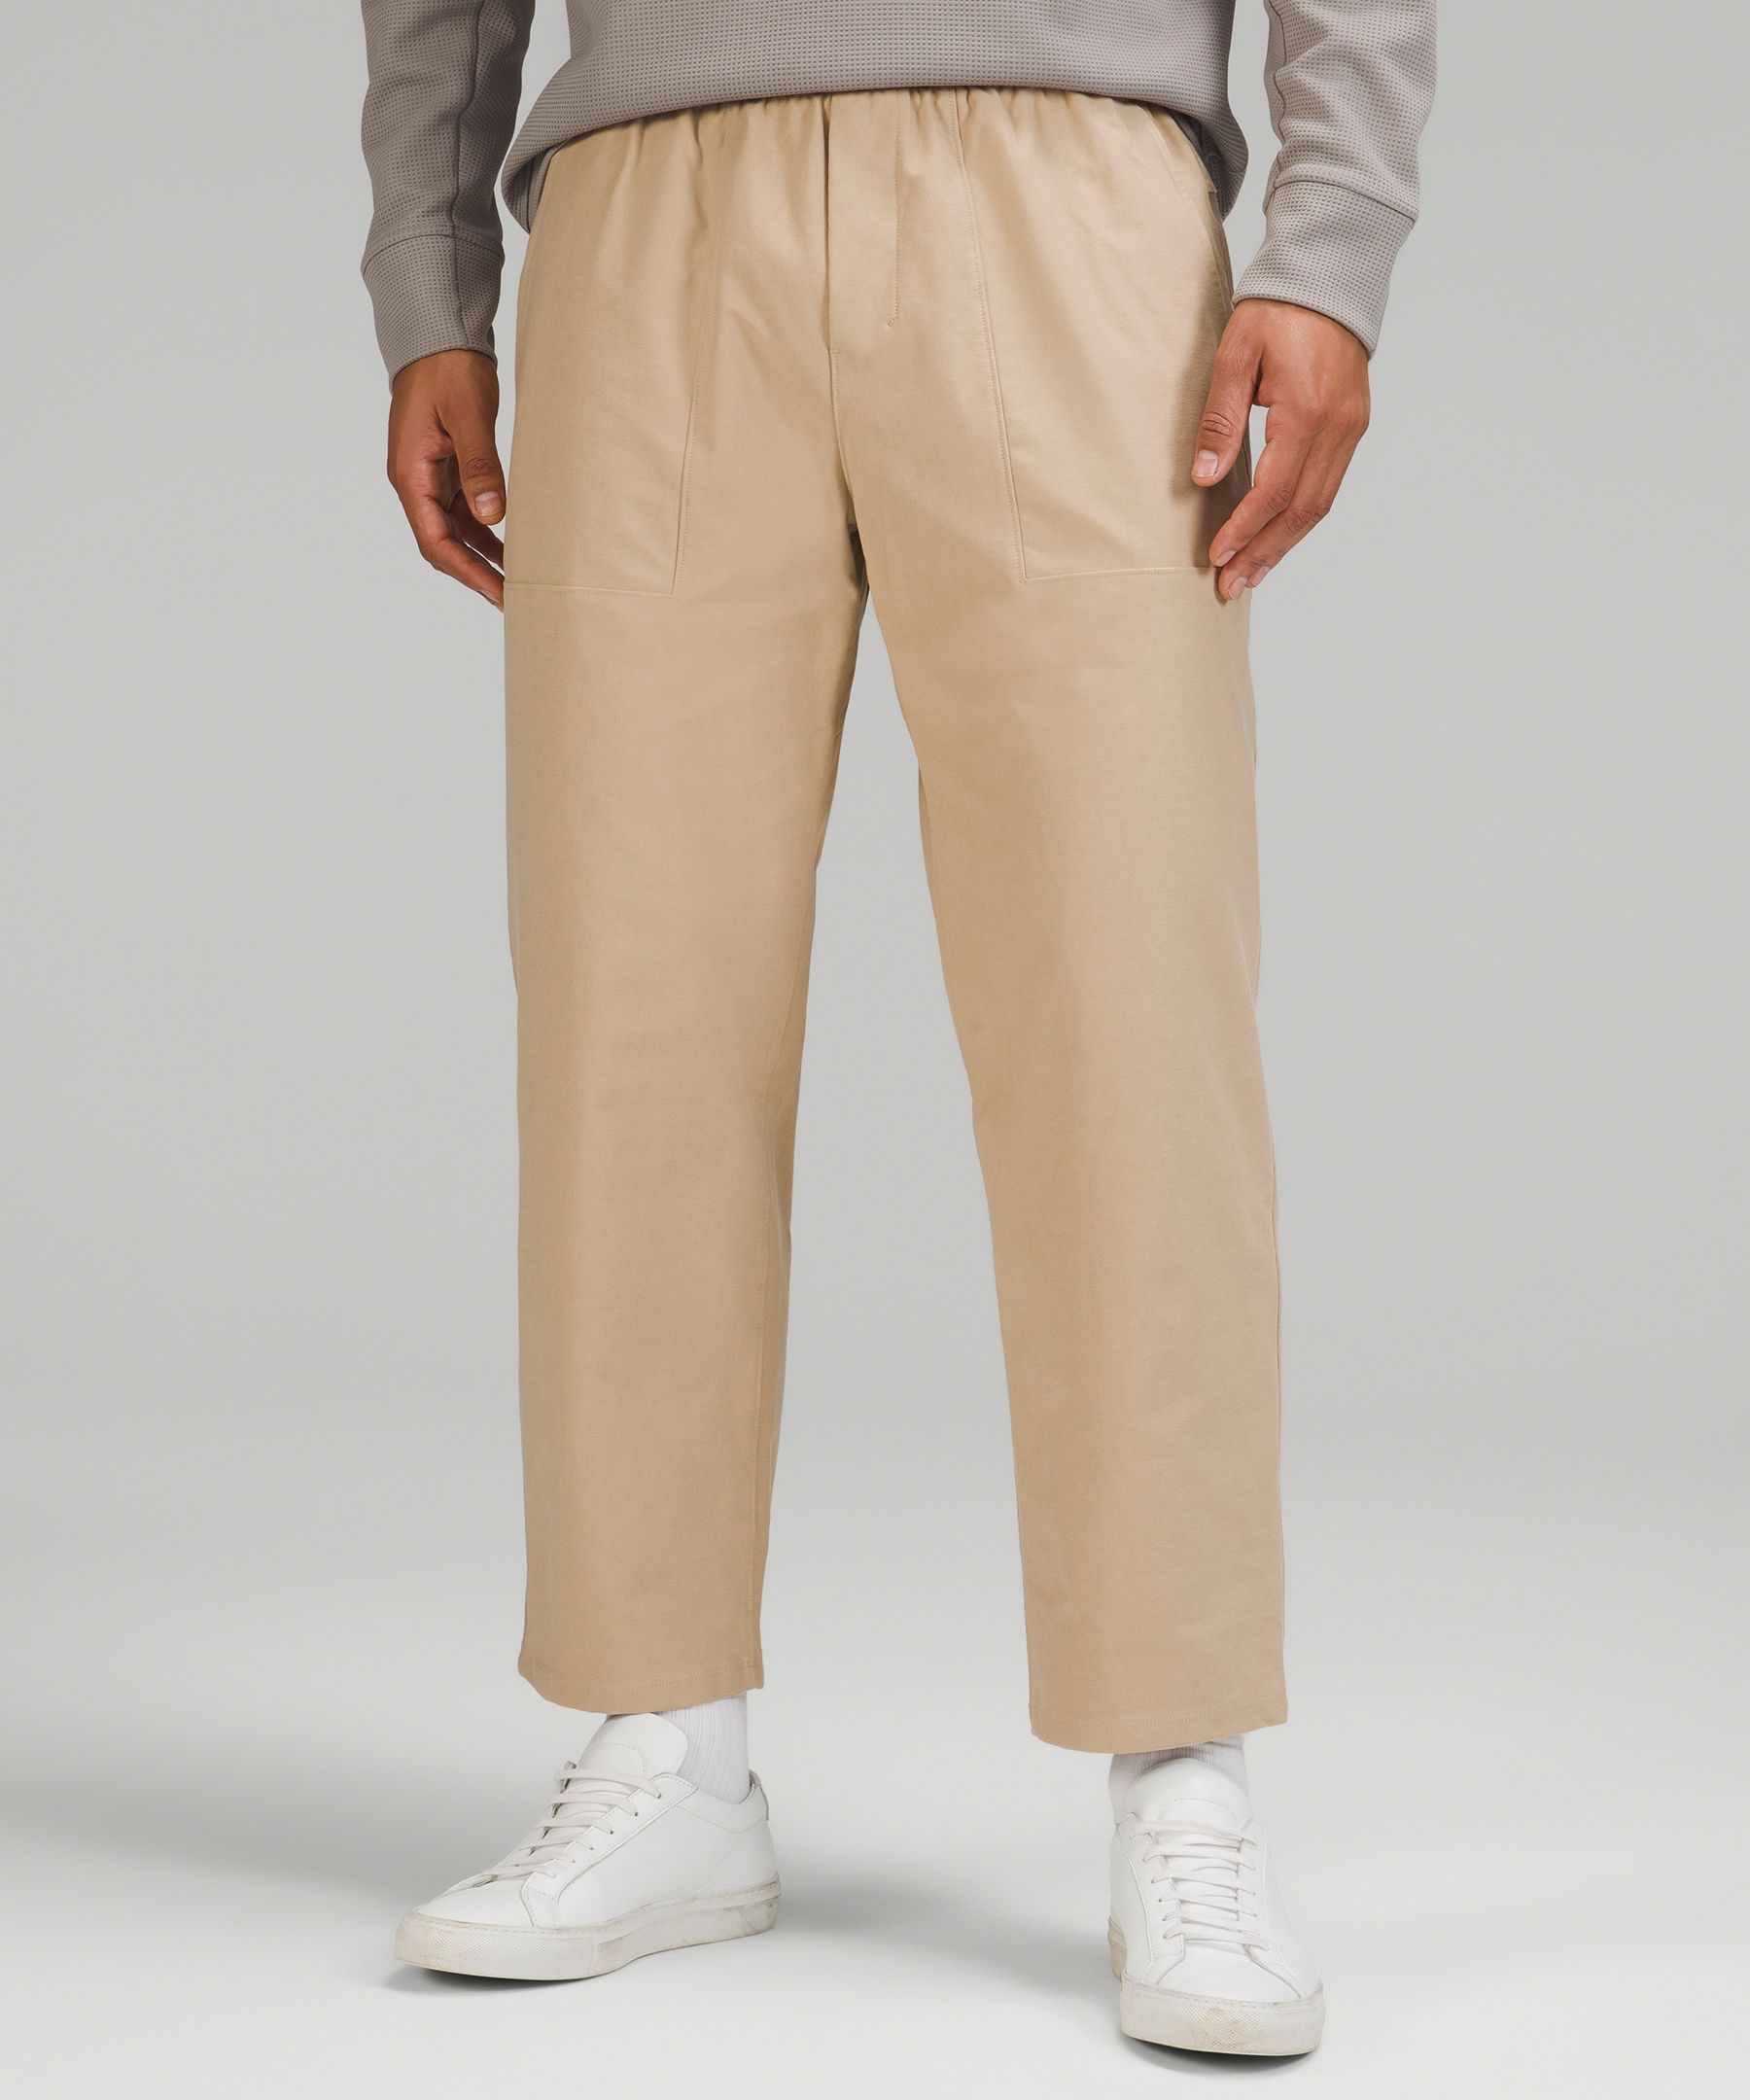 Lululemon Utilitech Pull-on Relaxed-fit Pants